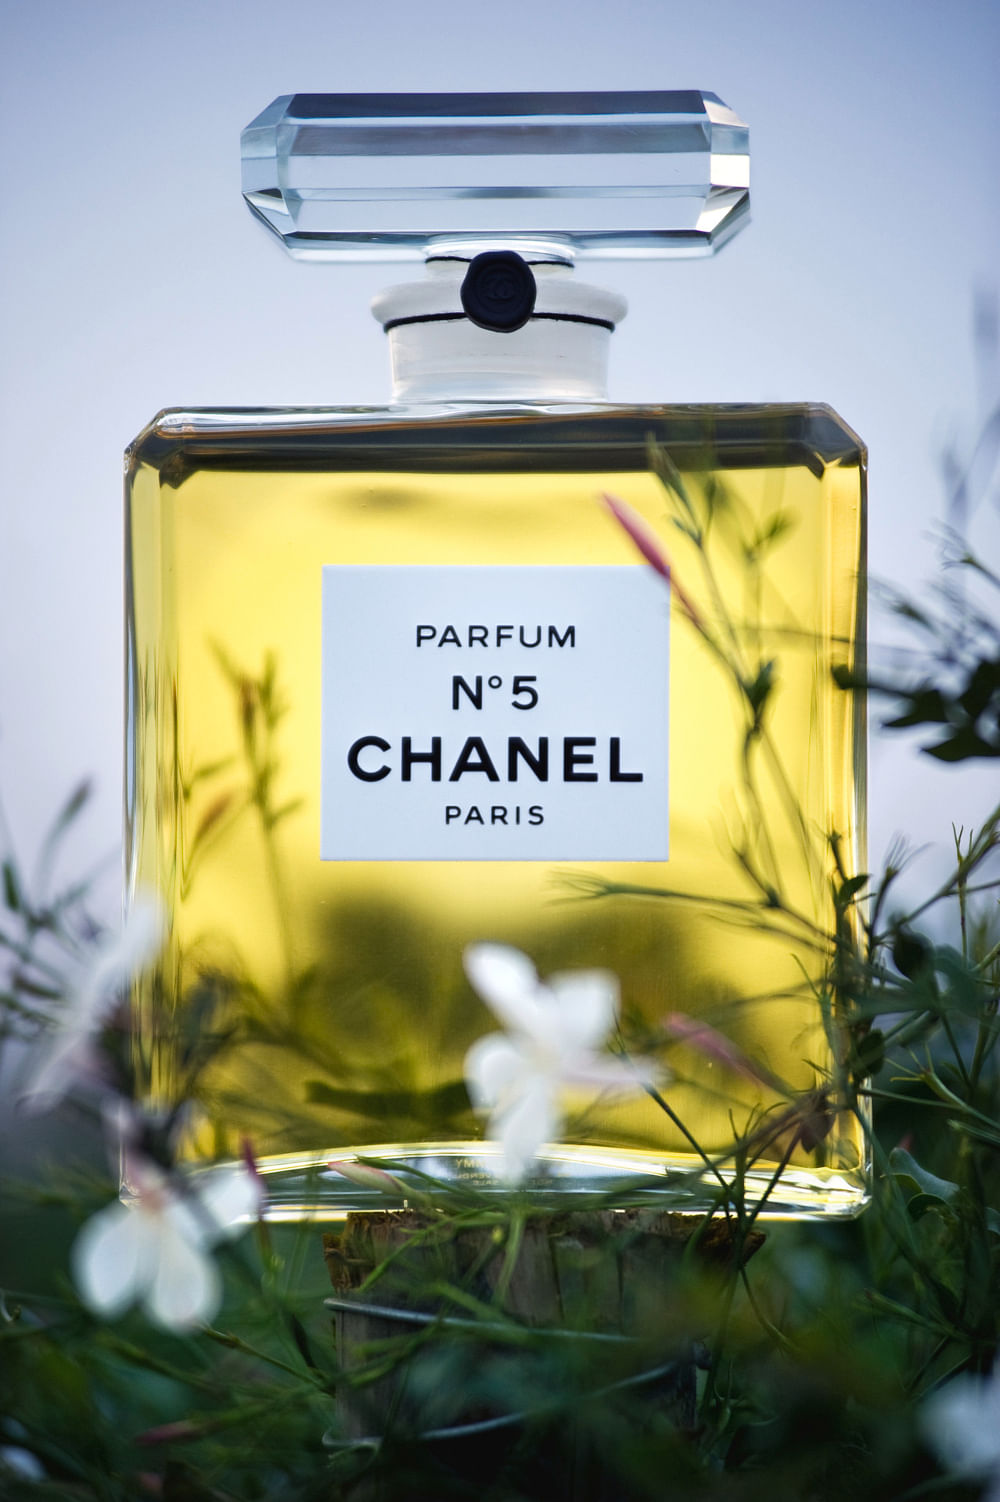 100th Anniversary of Chanel No. 5, the classic fragrance from Coco Chanel